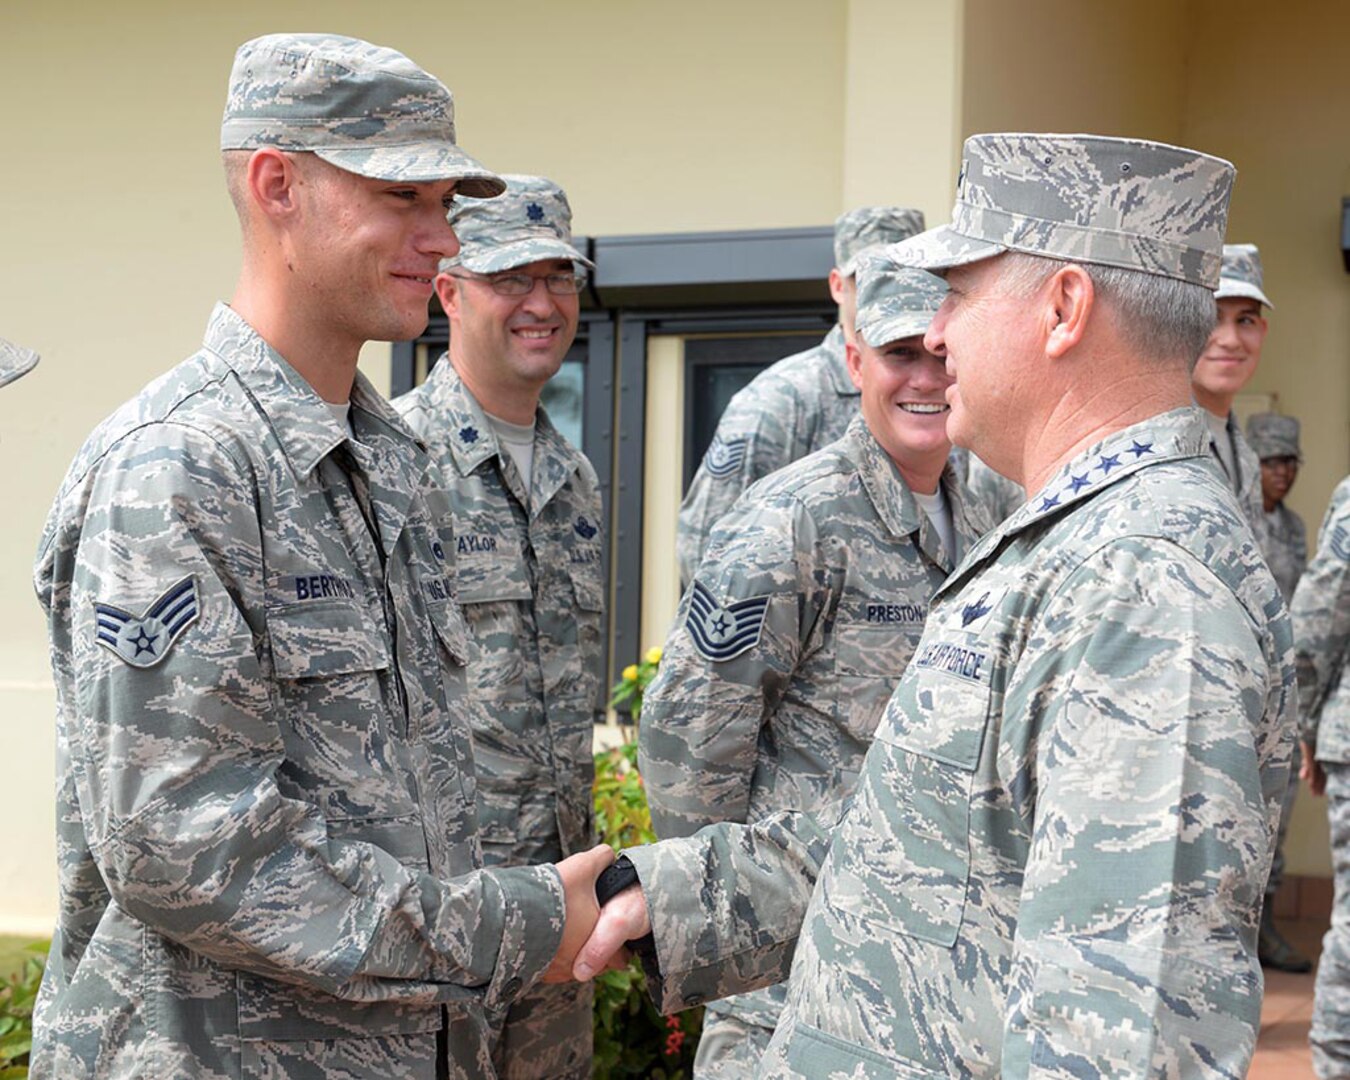 Air Force Chief of Staff Gen. Mark A. Welsh III greets Senior Airman John Berthold, 36th Munitions Squadron munitions inspector, Jan. 21, 2016, during his visit to Andersen Air Force Base, Guam. Welsh spoke to Airmen about the outlook of the Air Force and the importance of caring for each other. 